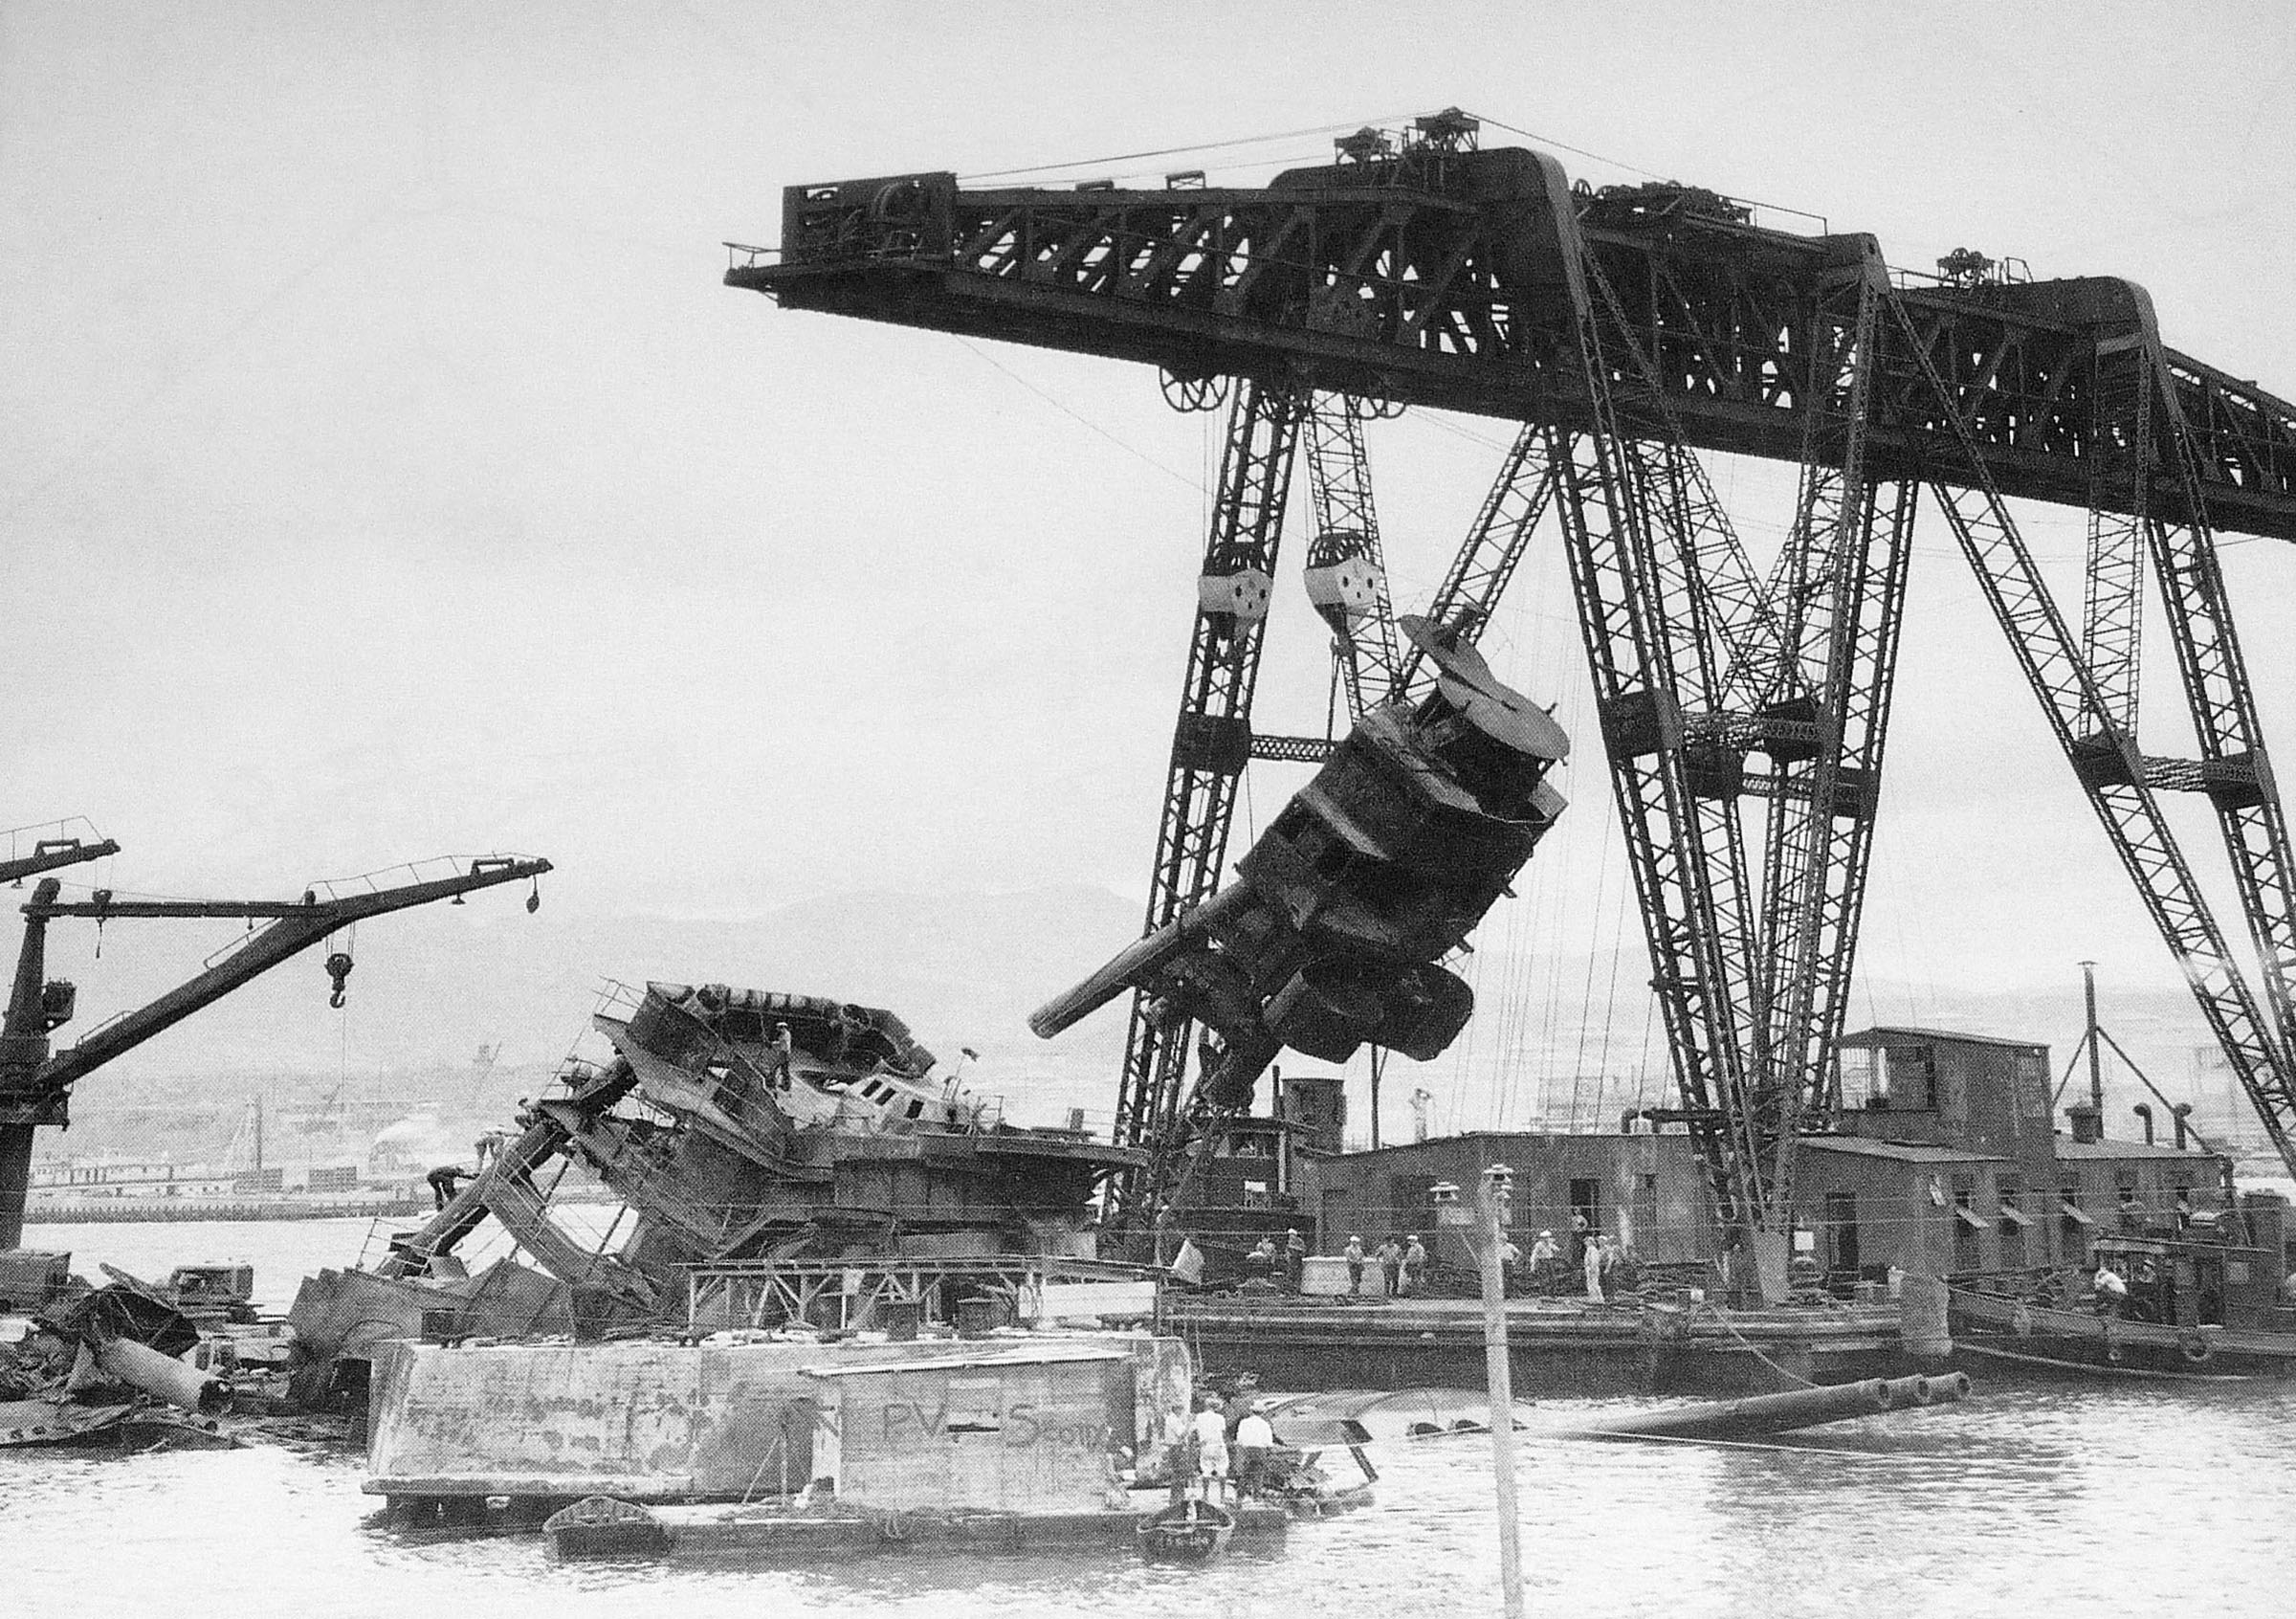 Floating crane YD-25 raising USS Arizona’s foremast during salvage operations in Pearl Harbor, Oahu, Hawaii, circa 1943. Note the guns of Arizona's No. 2 turret rising out of the water.